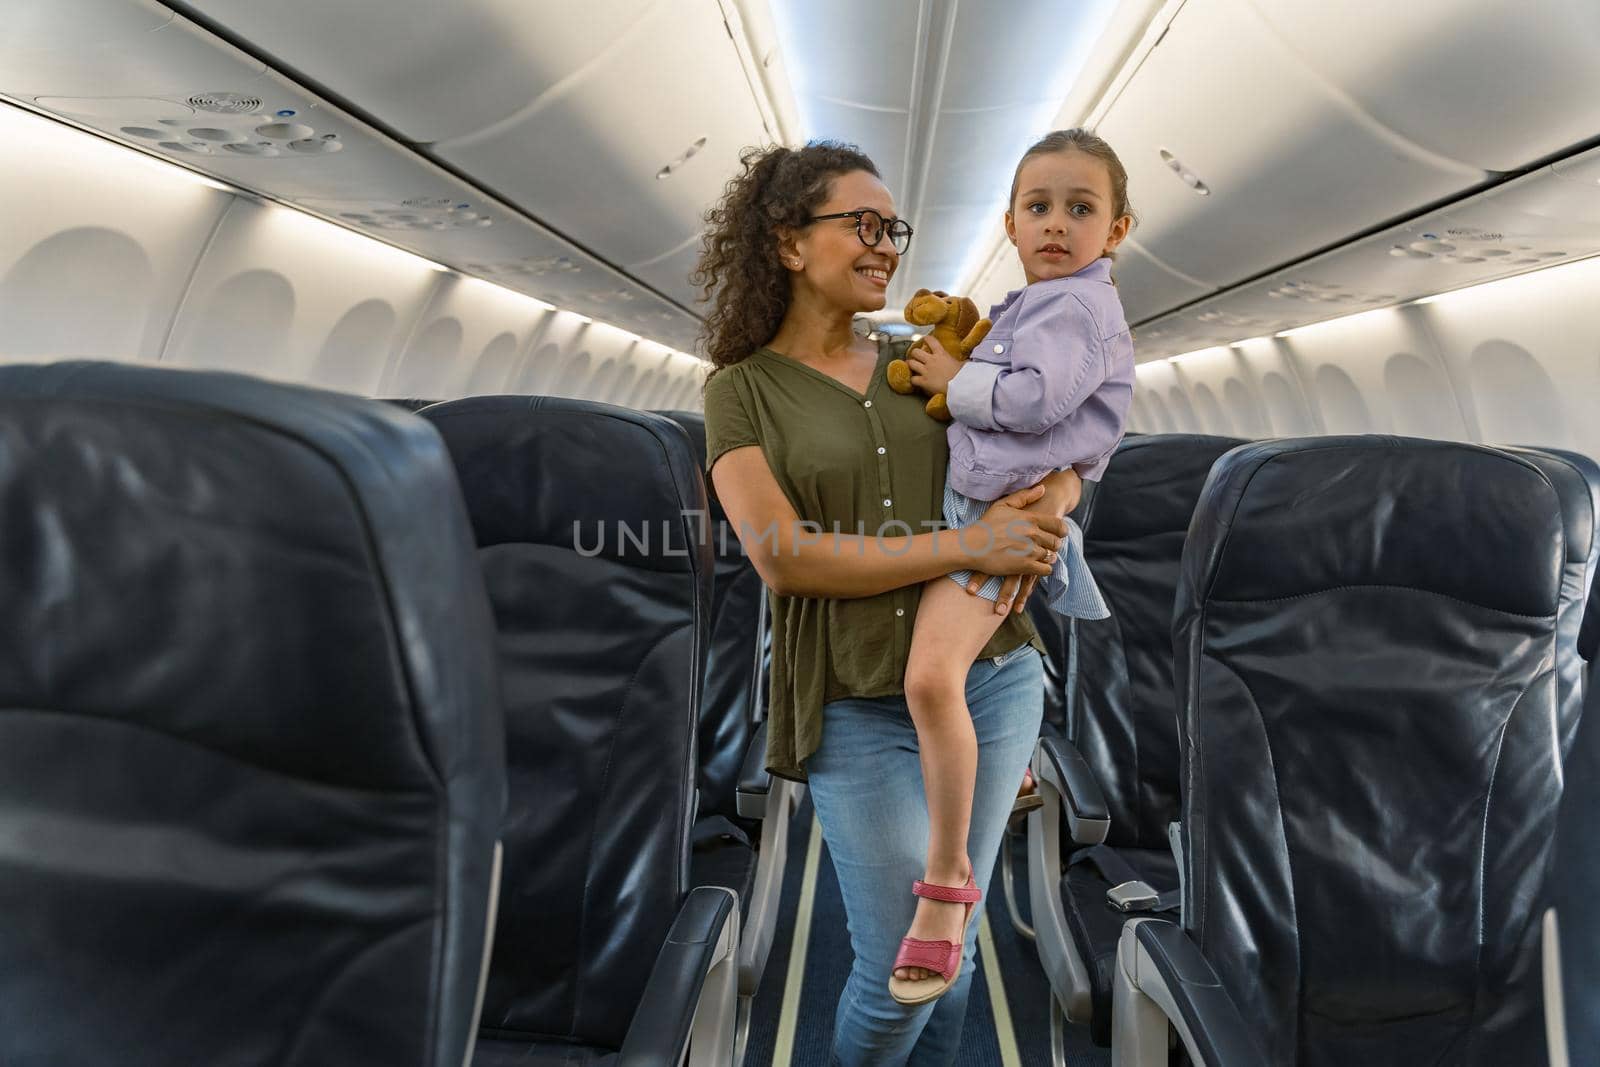 Smiling pretty woman holding kid while standing in airplane before the flight. Trip concept